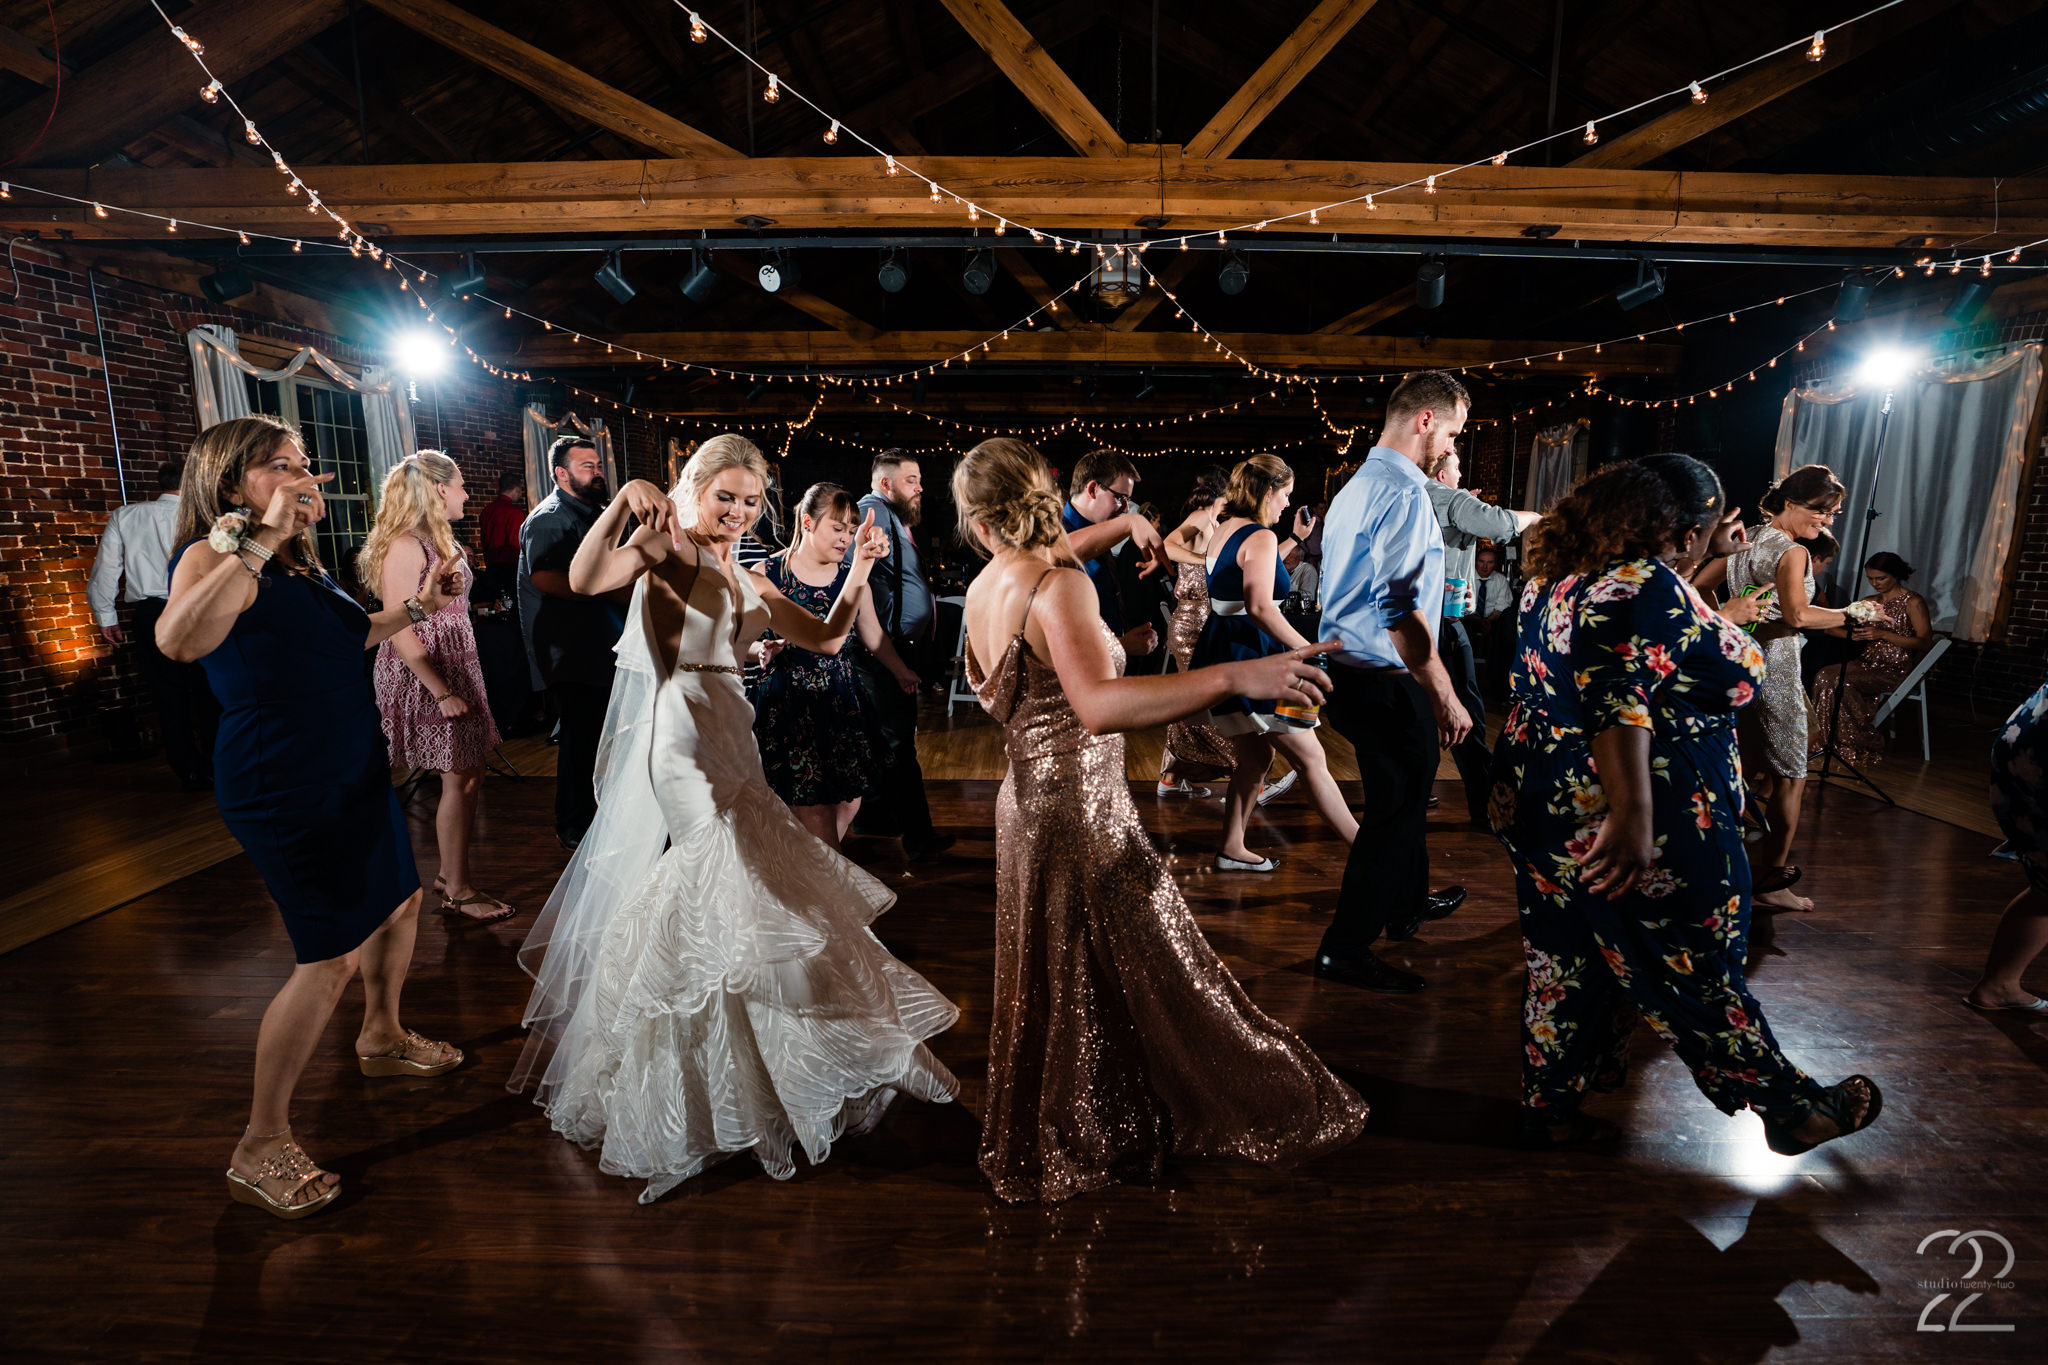  Top of the Market in Dayton, Ohio has the perfect dance floors for you and your guests to bust a move. 